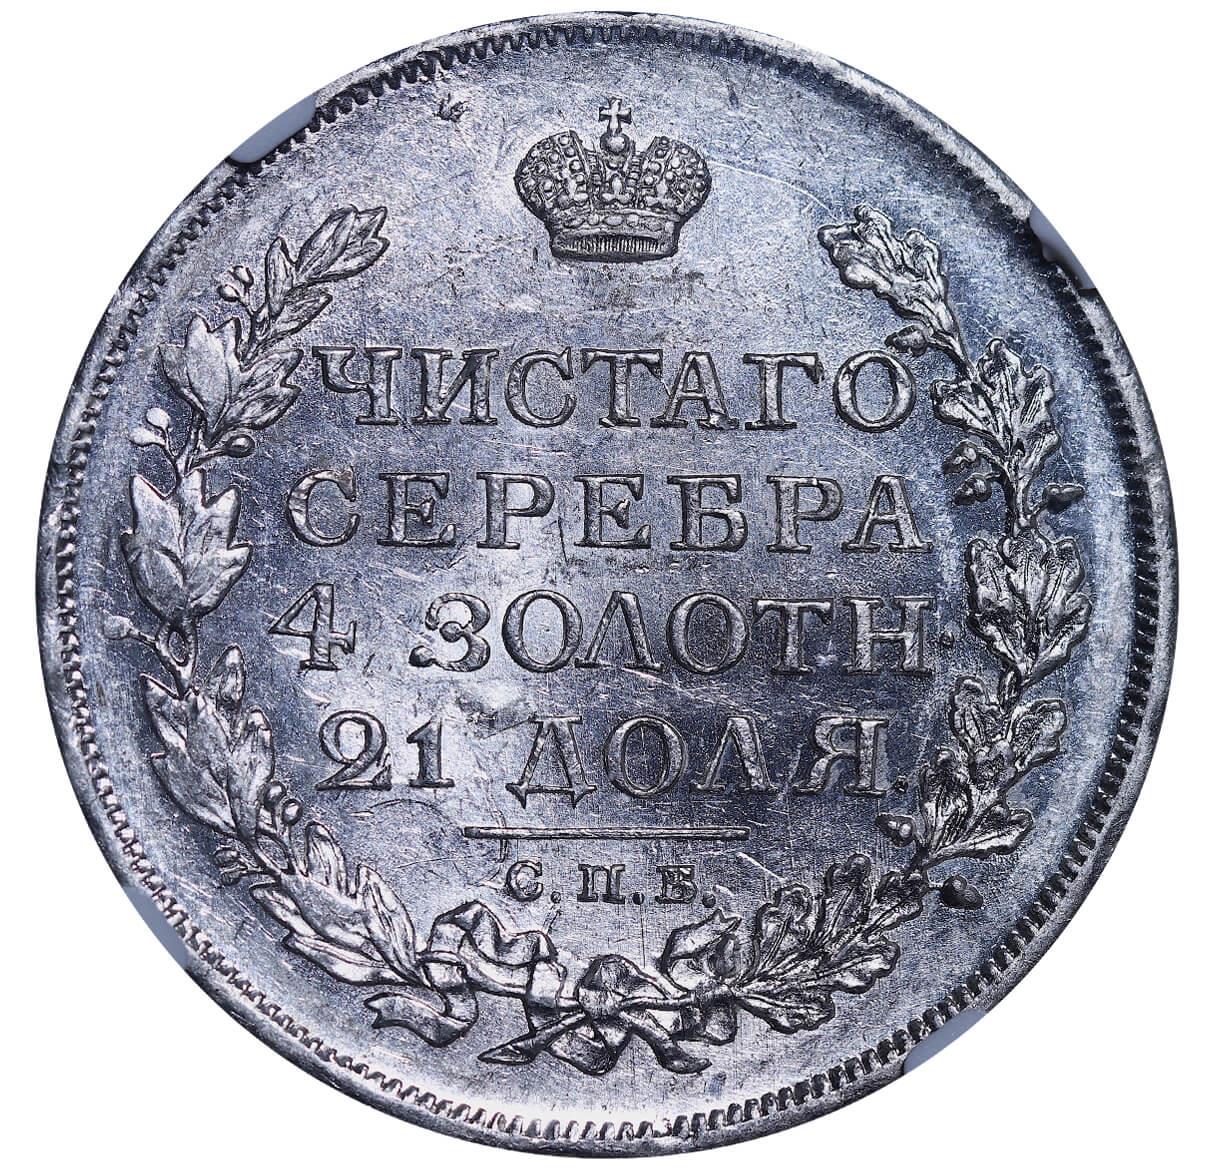 Russian Empire, 1 Rouble, 1817 year, SPB-PS, NGC, MS 62 - Image 3 of 3